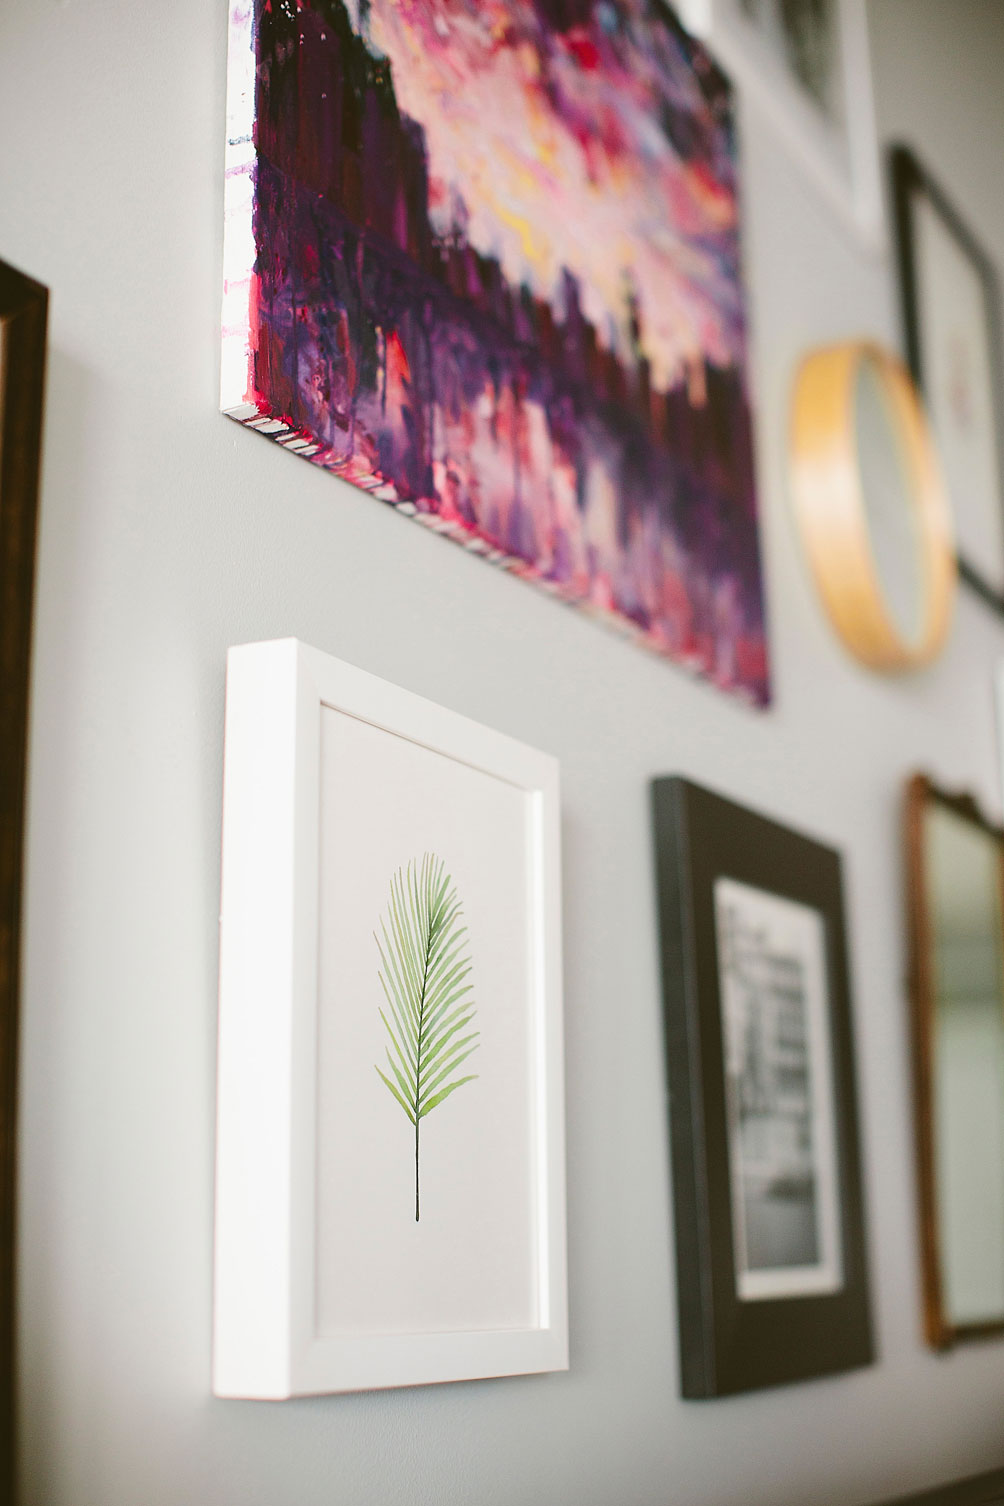 Leslie Musser of one brass fox shares her decor tips on how to create a gallery wall